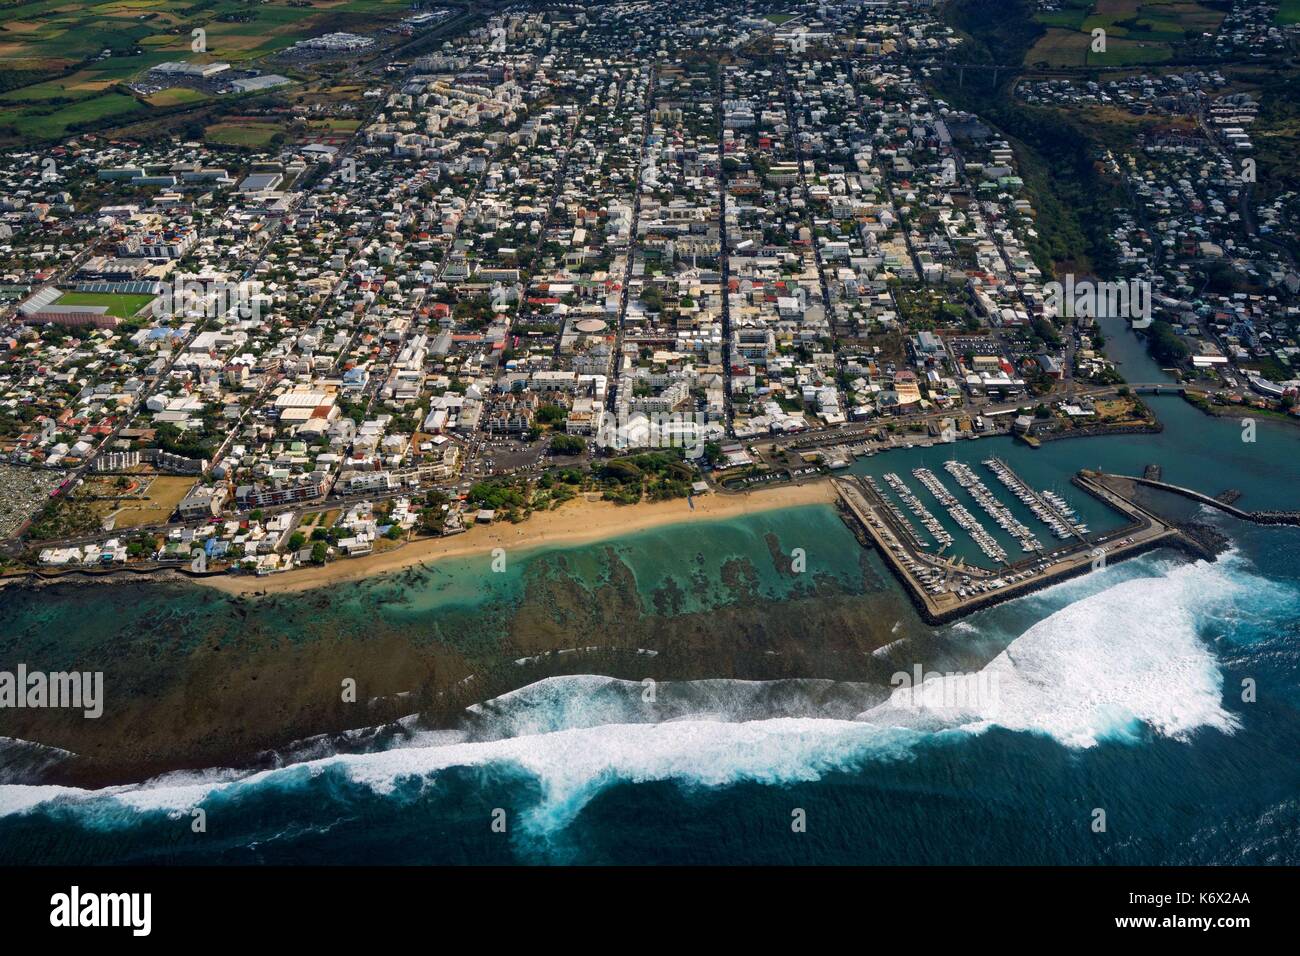 Reunion, Saint Pierre, sub-prefecture of Reunion island, Seaside town with  a port of 400 places, His Latin motto is Fortis fortuna fortior, which mean  Valor is stronger than fortune, Aerial view of